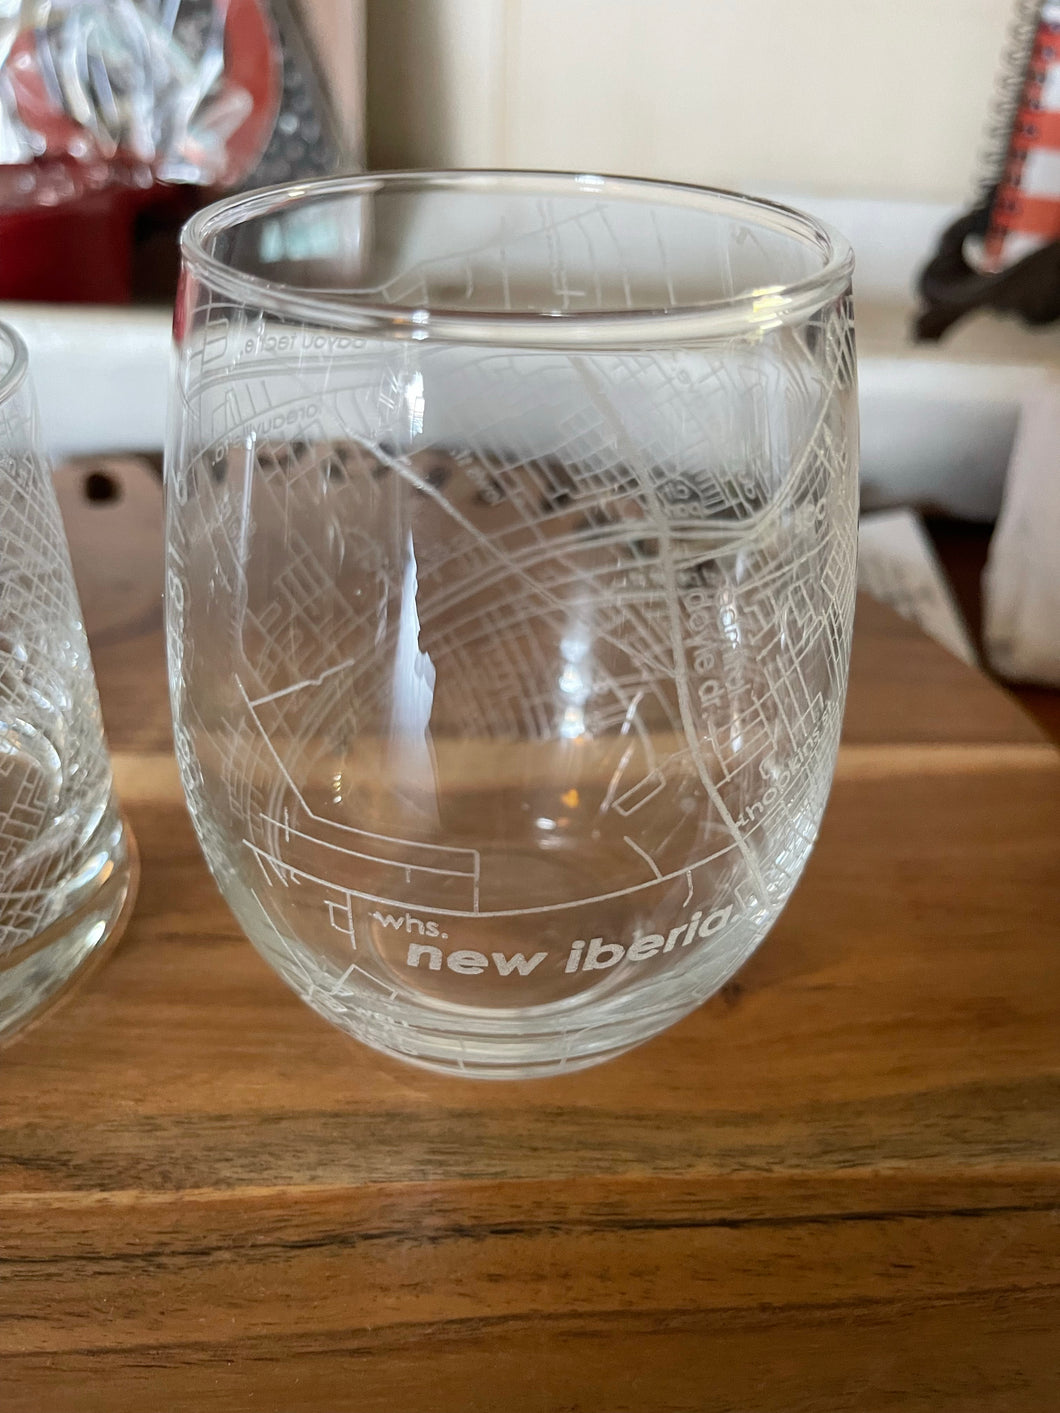 Well Told Stemless Wine Glass